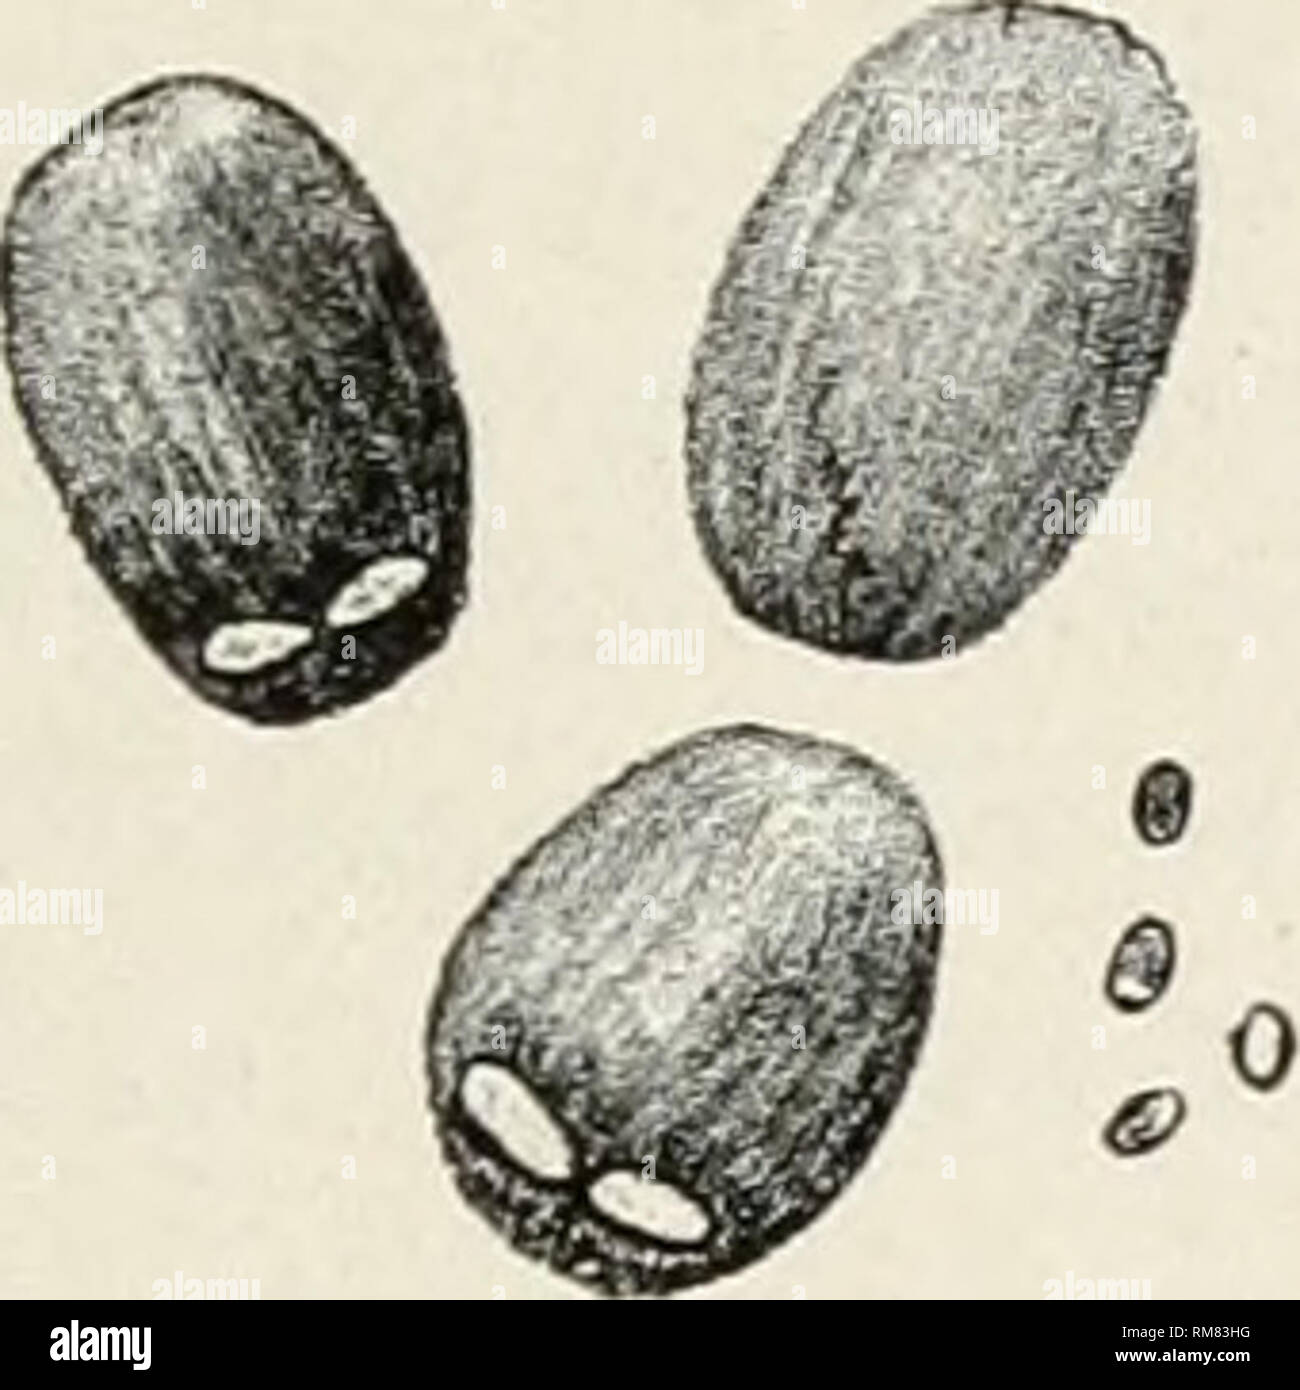 . Annual report of the Missouri State Board of Agriculture. Missouri. State Board of Agriculture; Agriculture -- Missouri. Testing Farm Seeds. 365 The smaller broad-leaved plantain seeds (fig. 21, d) are similar to those of rat-tail plantain (fig. 18, 1), but are smaller, greenish or brown, the surface Slaving slender, wavy dark lines; common in poorly cleaned clover and grass seed. Bracted plantain seeds (fig. 21, e) are similar to those of buckhorn (fig. a8, m), but they are broader, dull reddish-brown, and the broad groove on one. Please note that these images are extracted from scanned pag Stock Photo